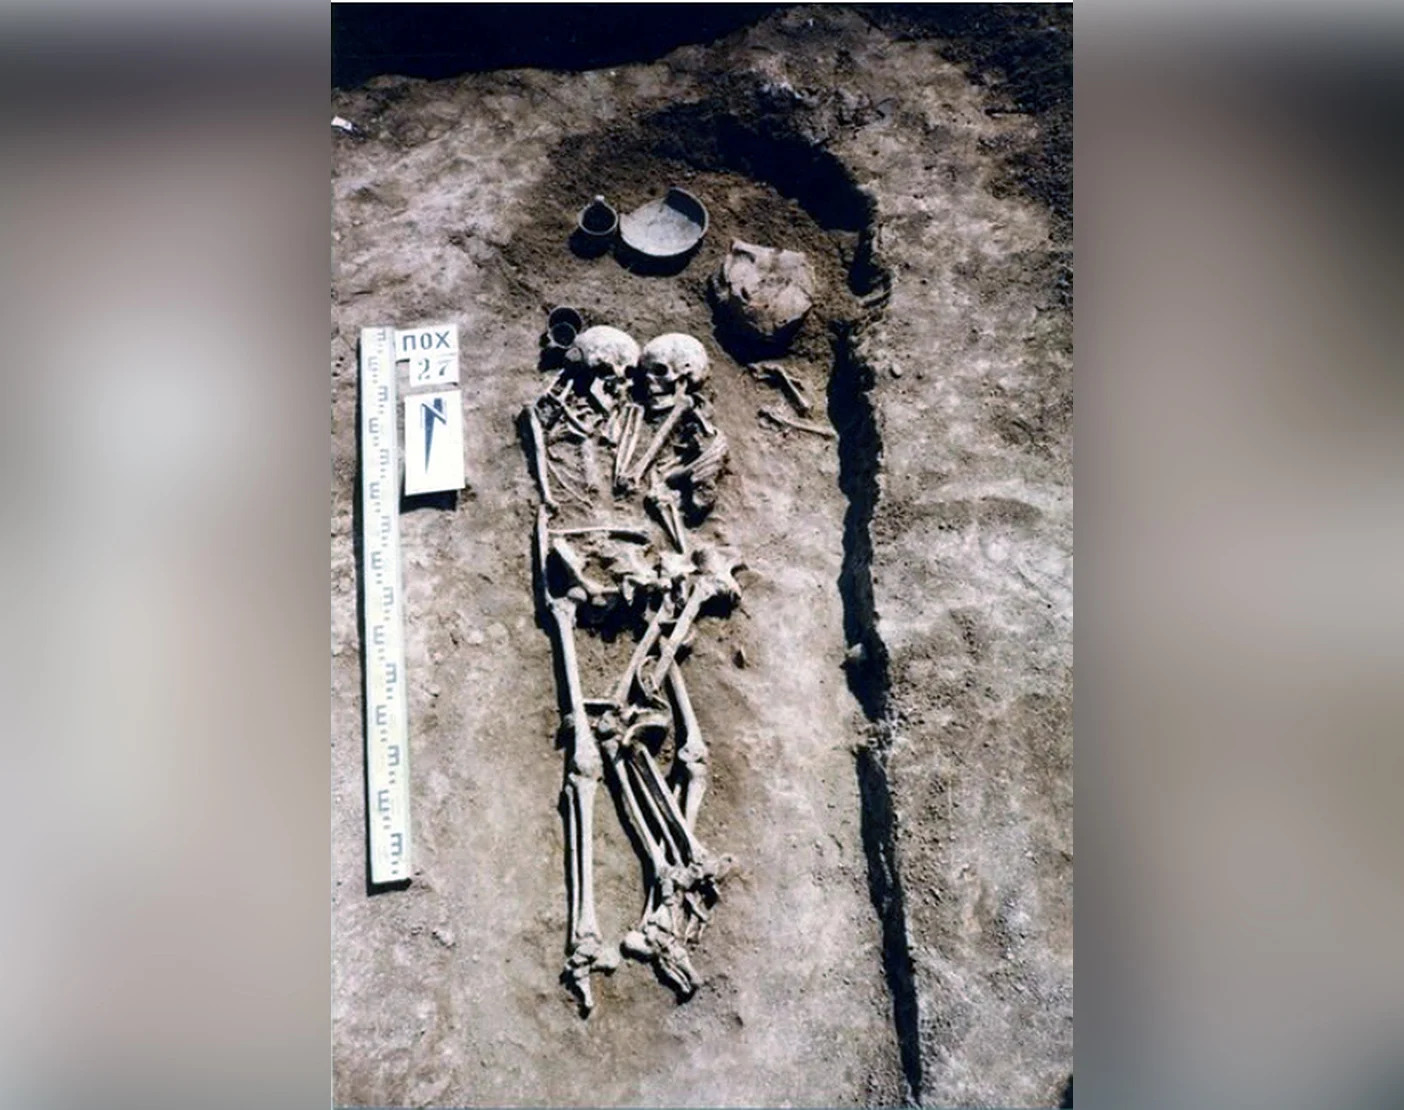 An ancient man and woman have been found locked in a loving embrace for 3000 years in a grave in Ukraine. Source: Australscope